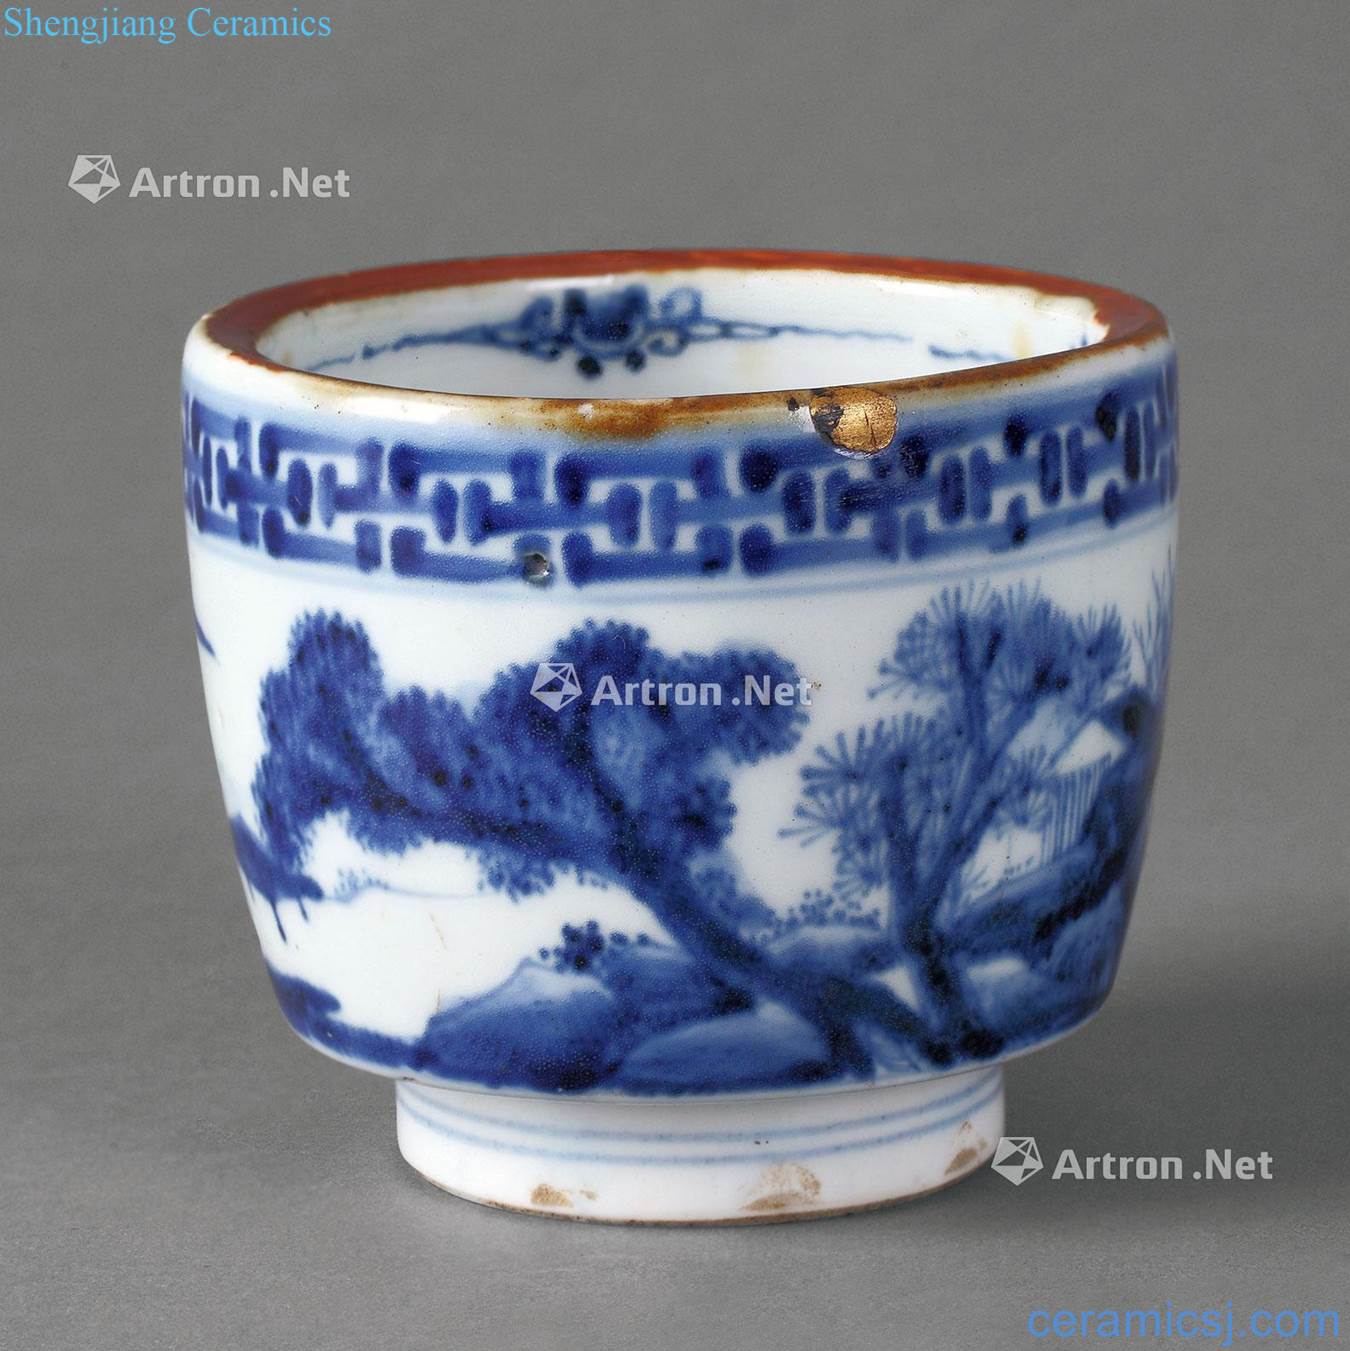 qing Blue and white landscape pattern cans